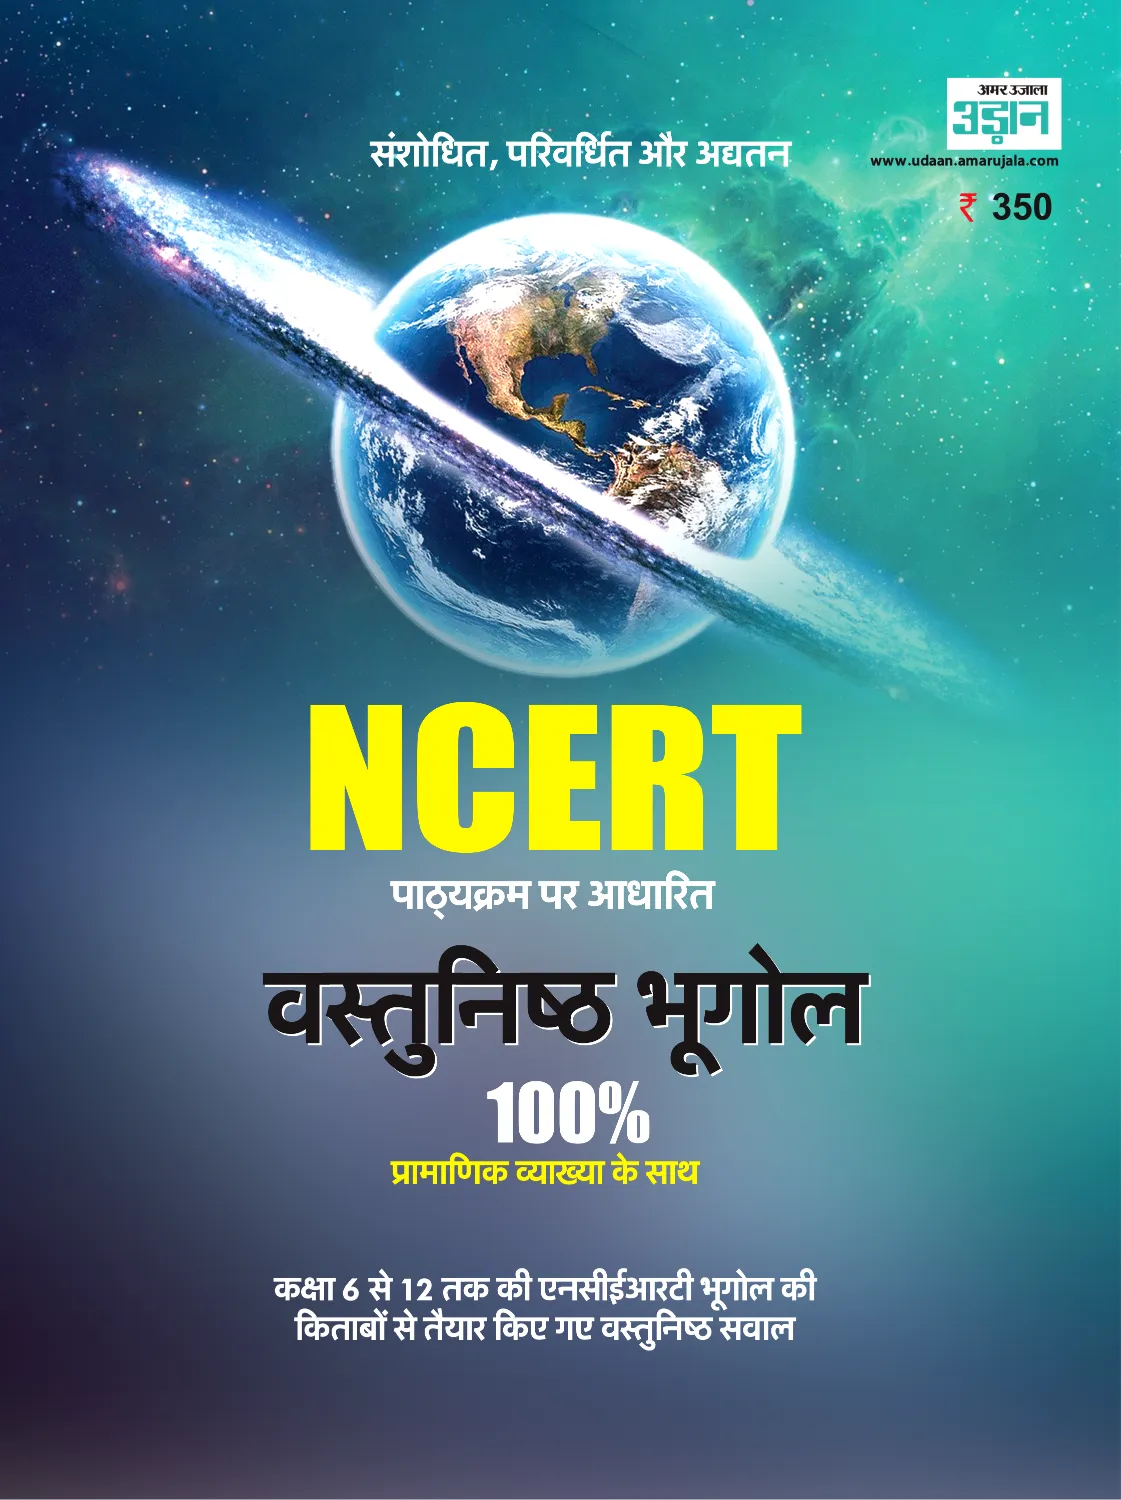 NCERT Geography BOOK